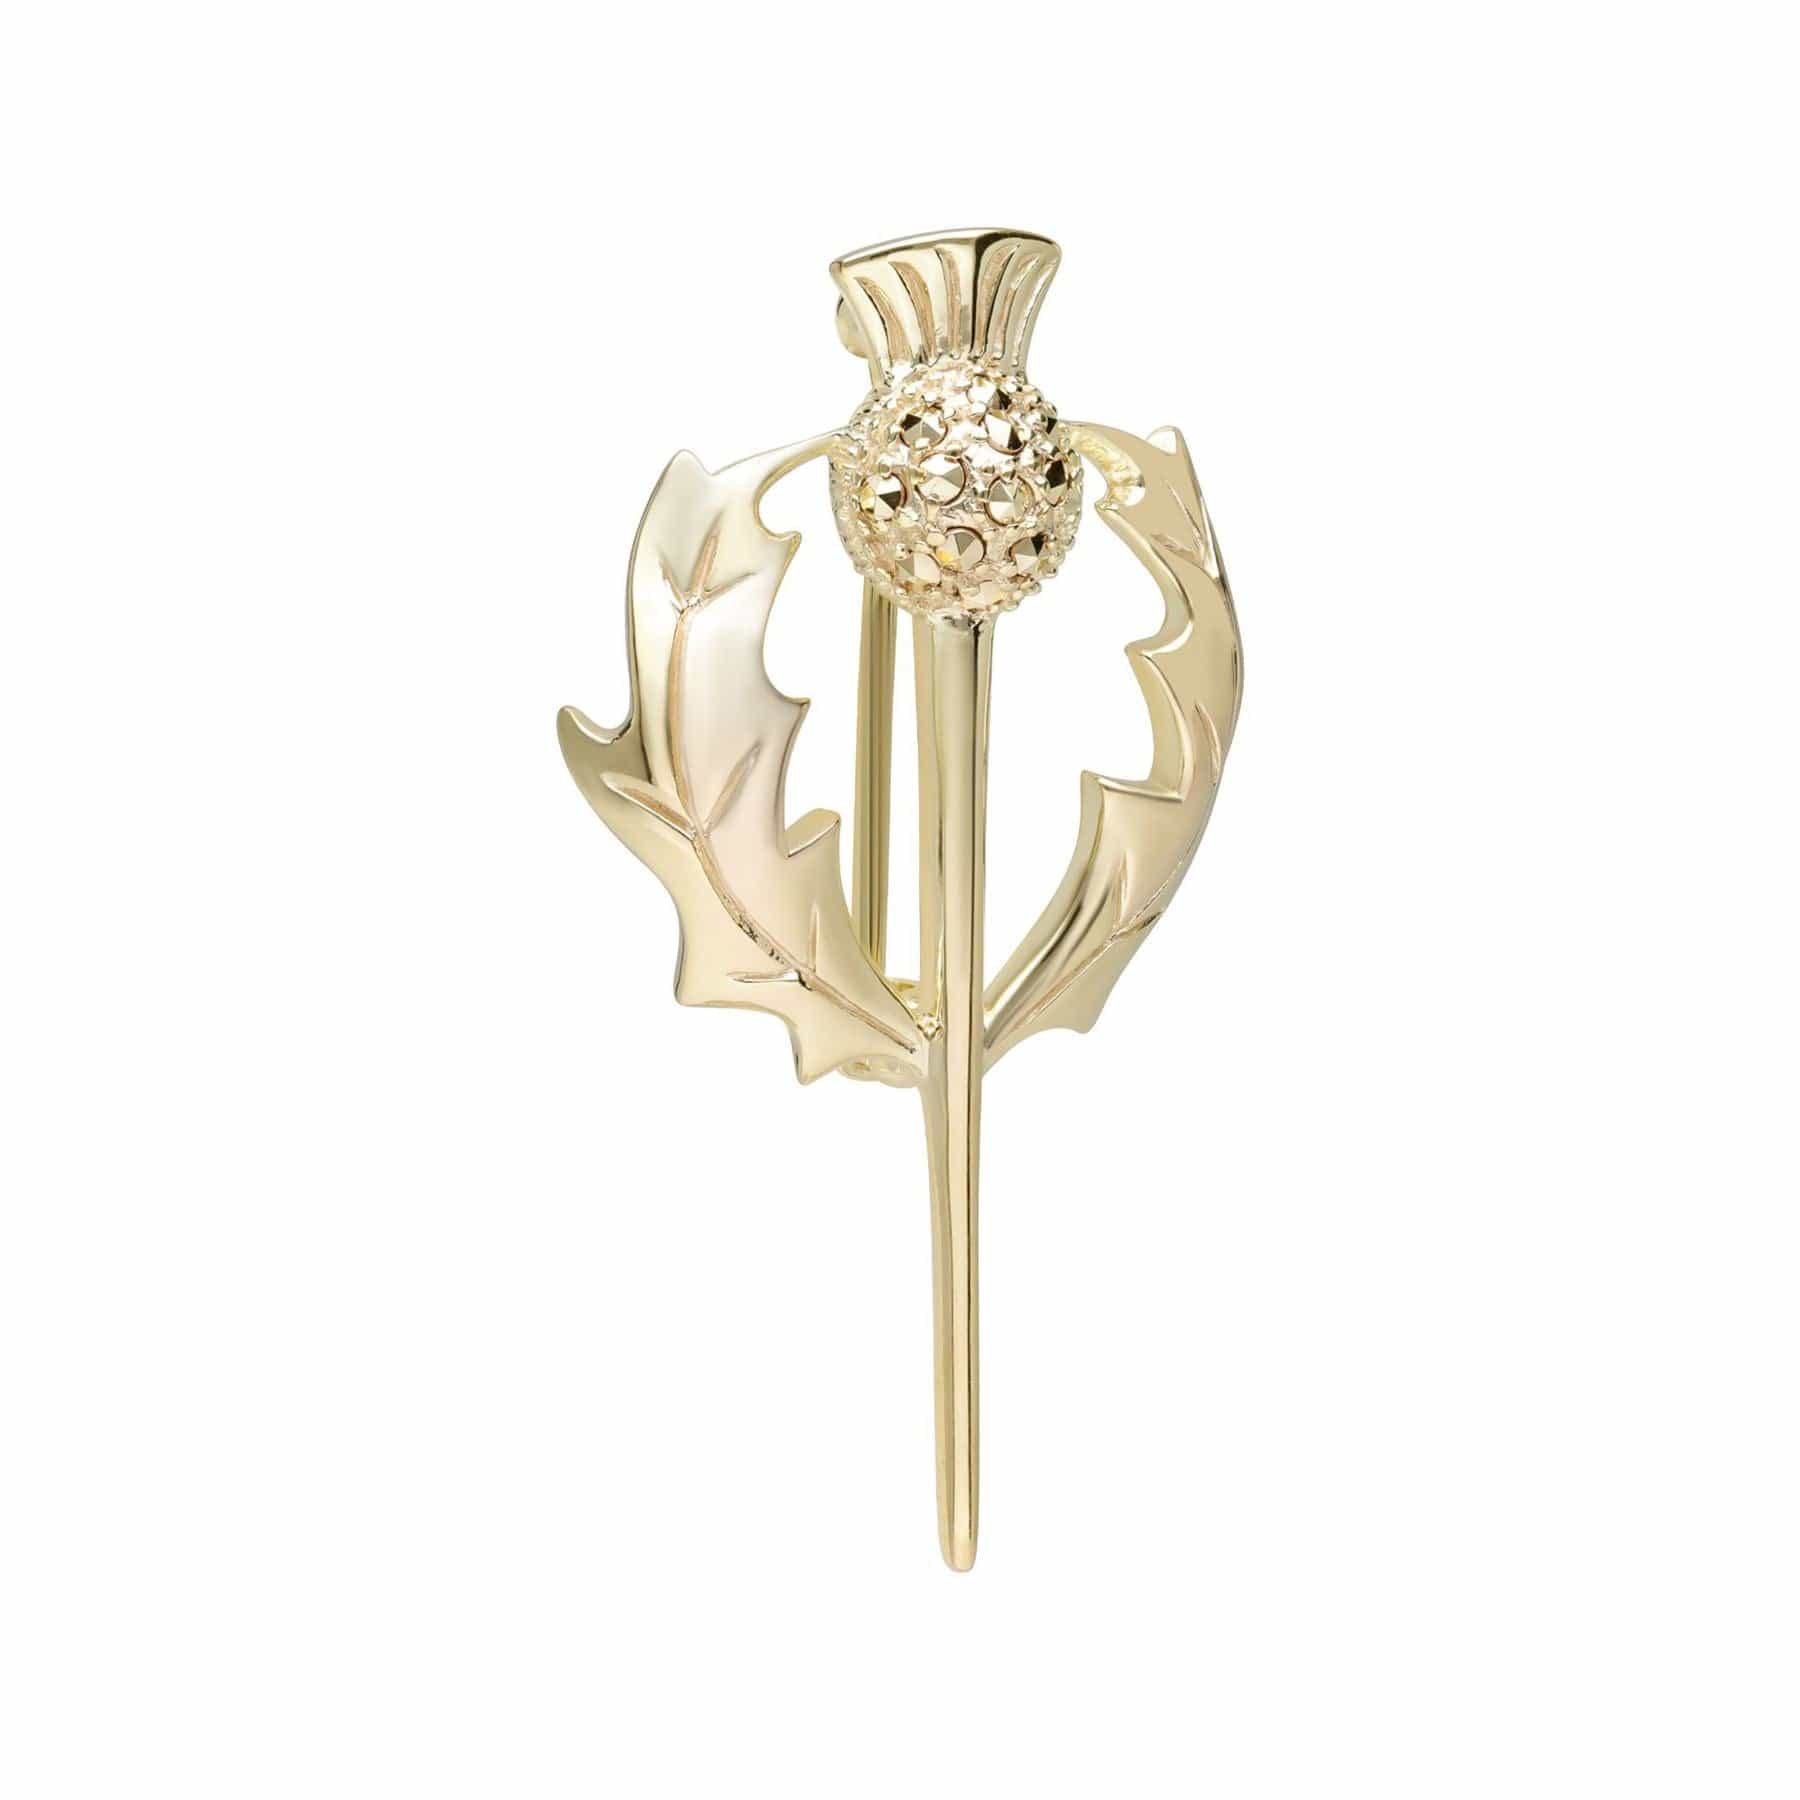 Marcasite Thistle Brooch in 18ct Gold Plated Silver - Gemondo